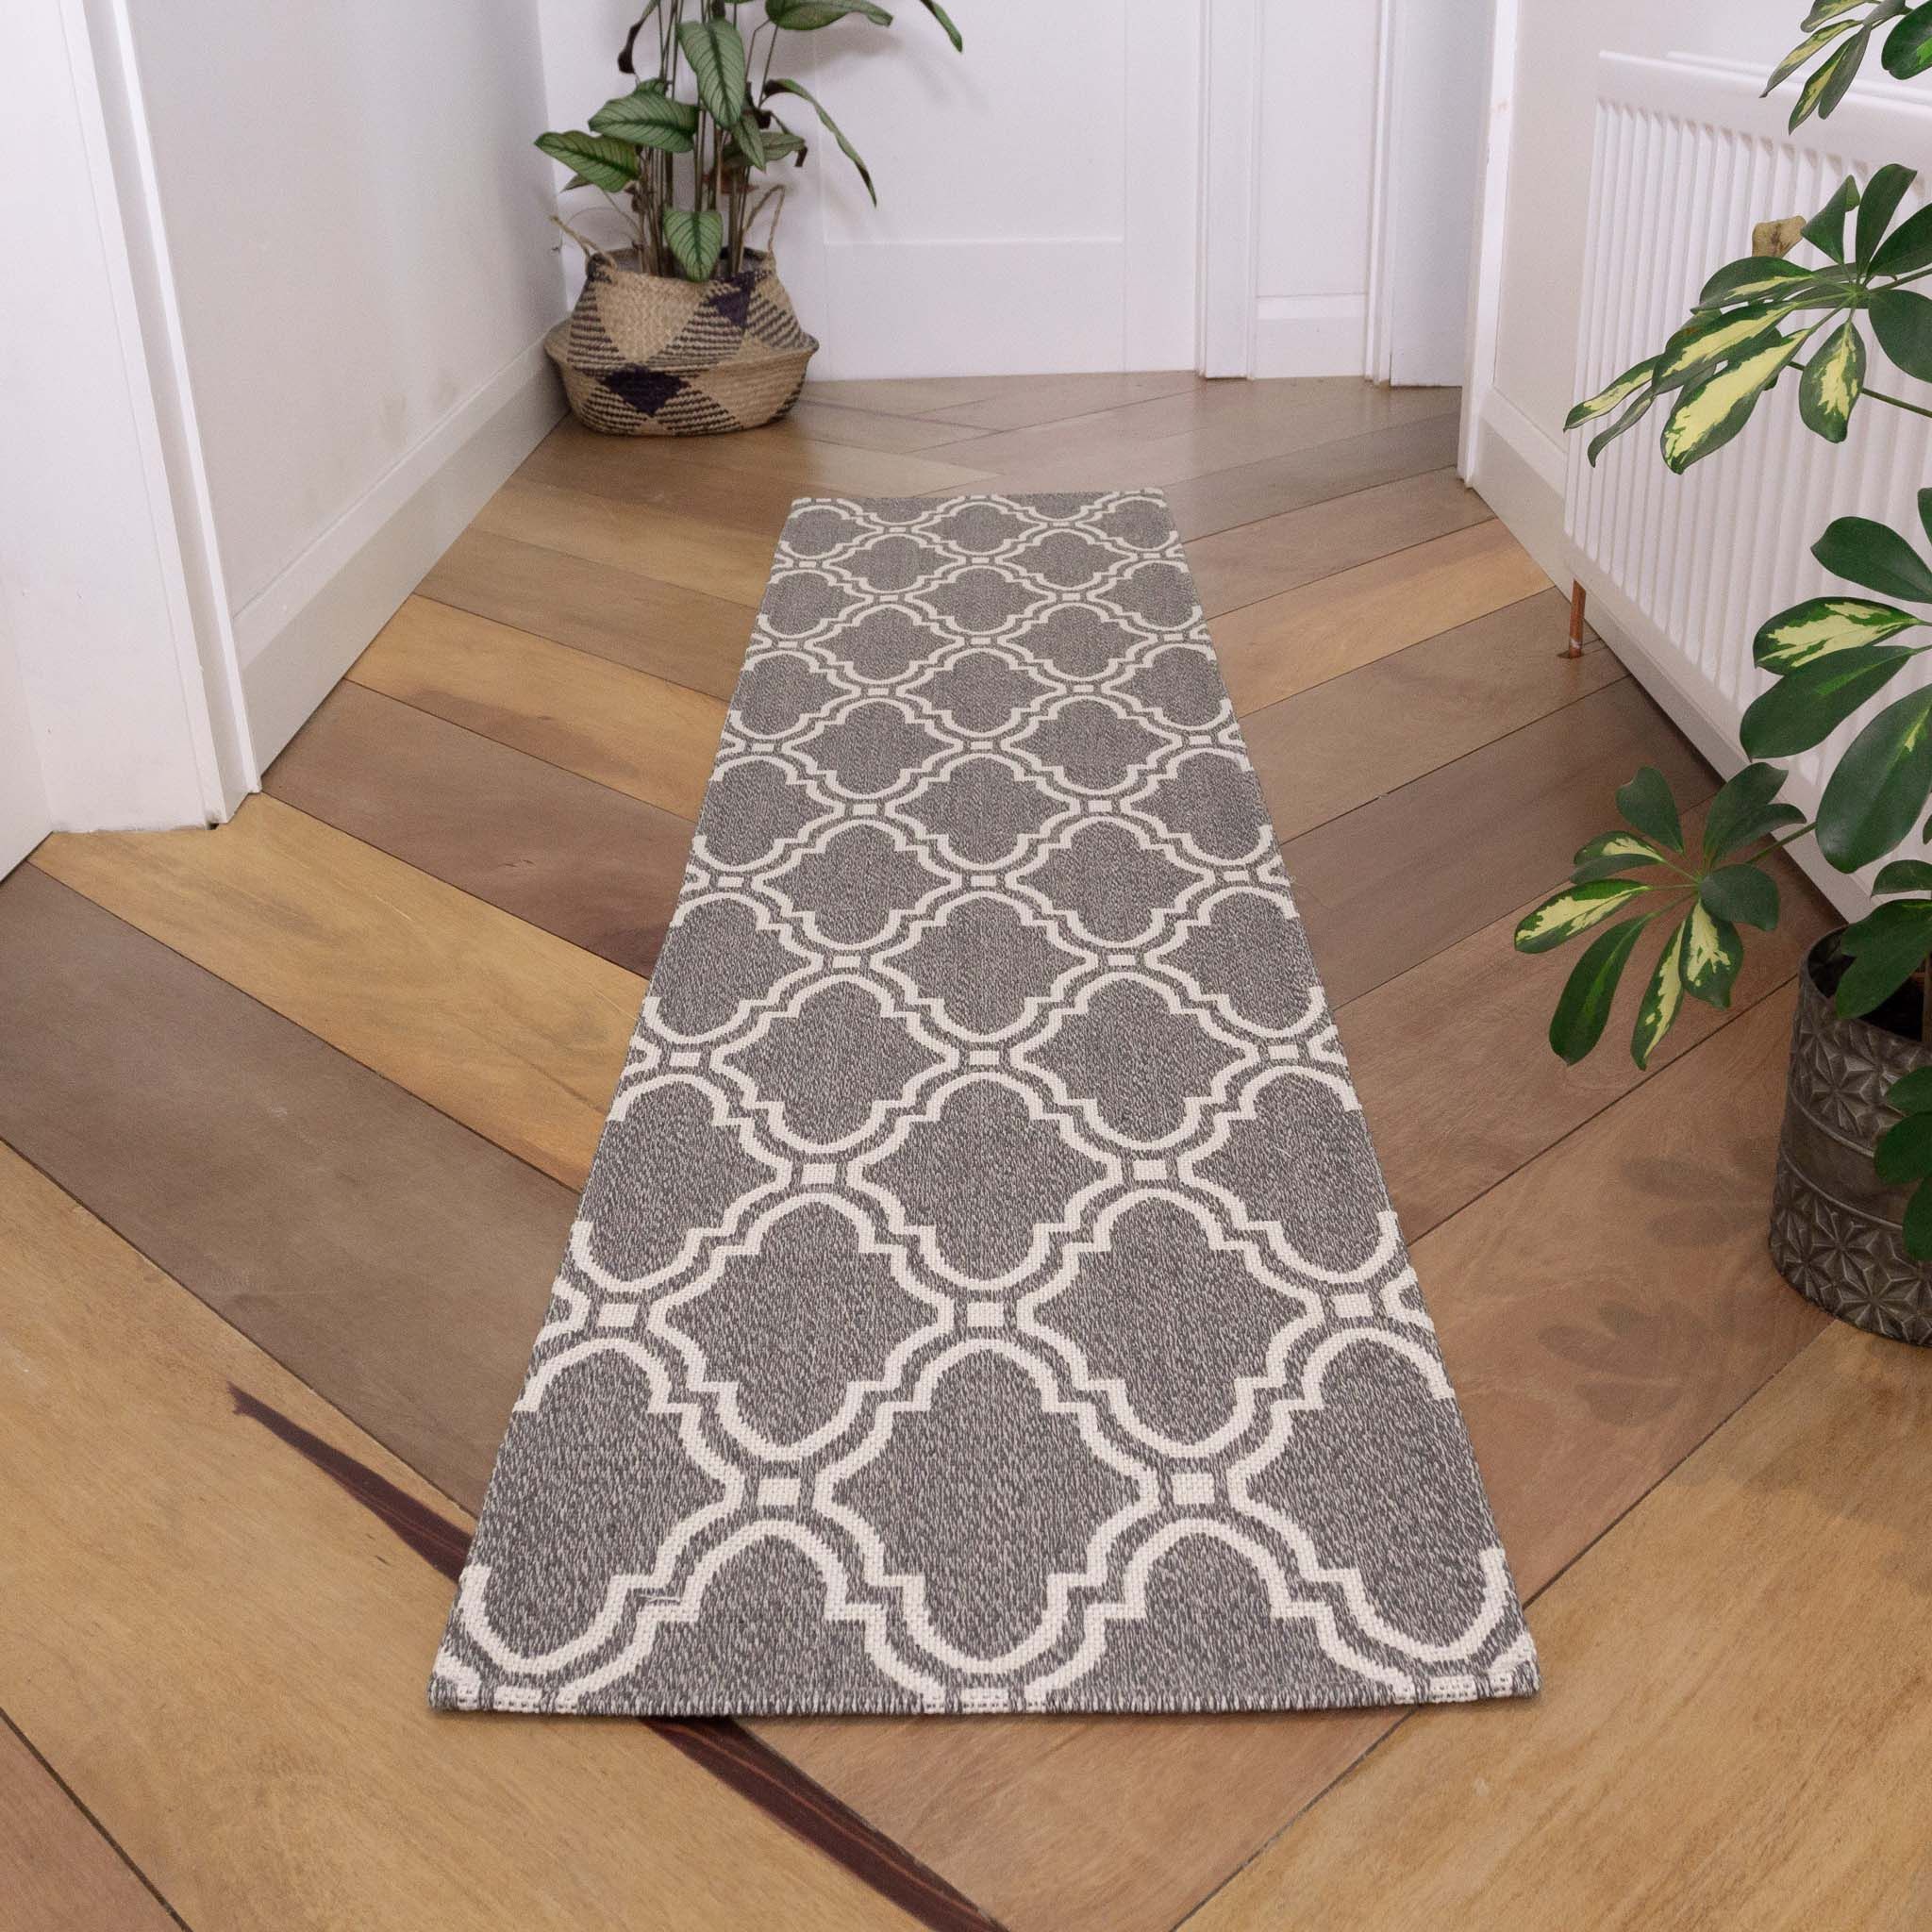 Grey Trellis Woven Recycled Cotton Runner Rug | Kendall | Kukoon Rugs Europe Intended For Cotton Runner Rugs (View 9 of 15)